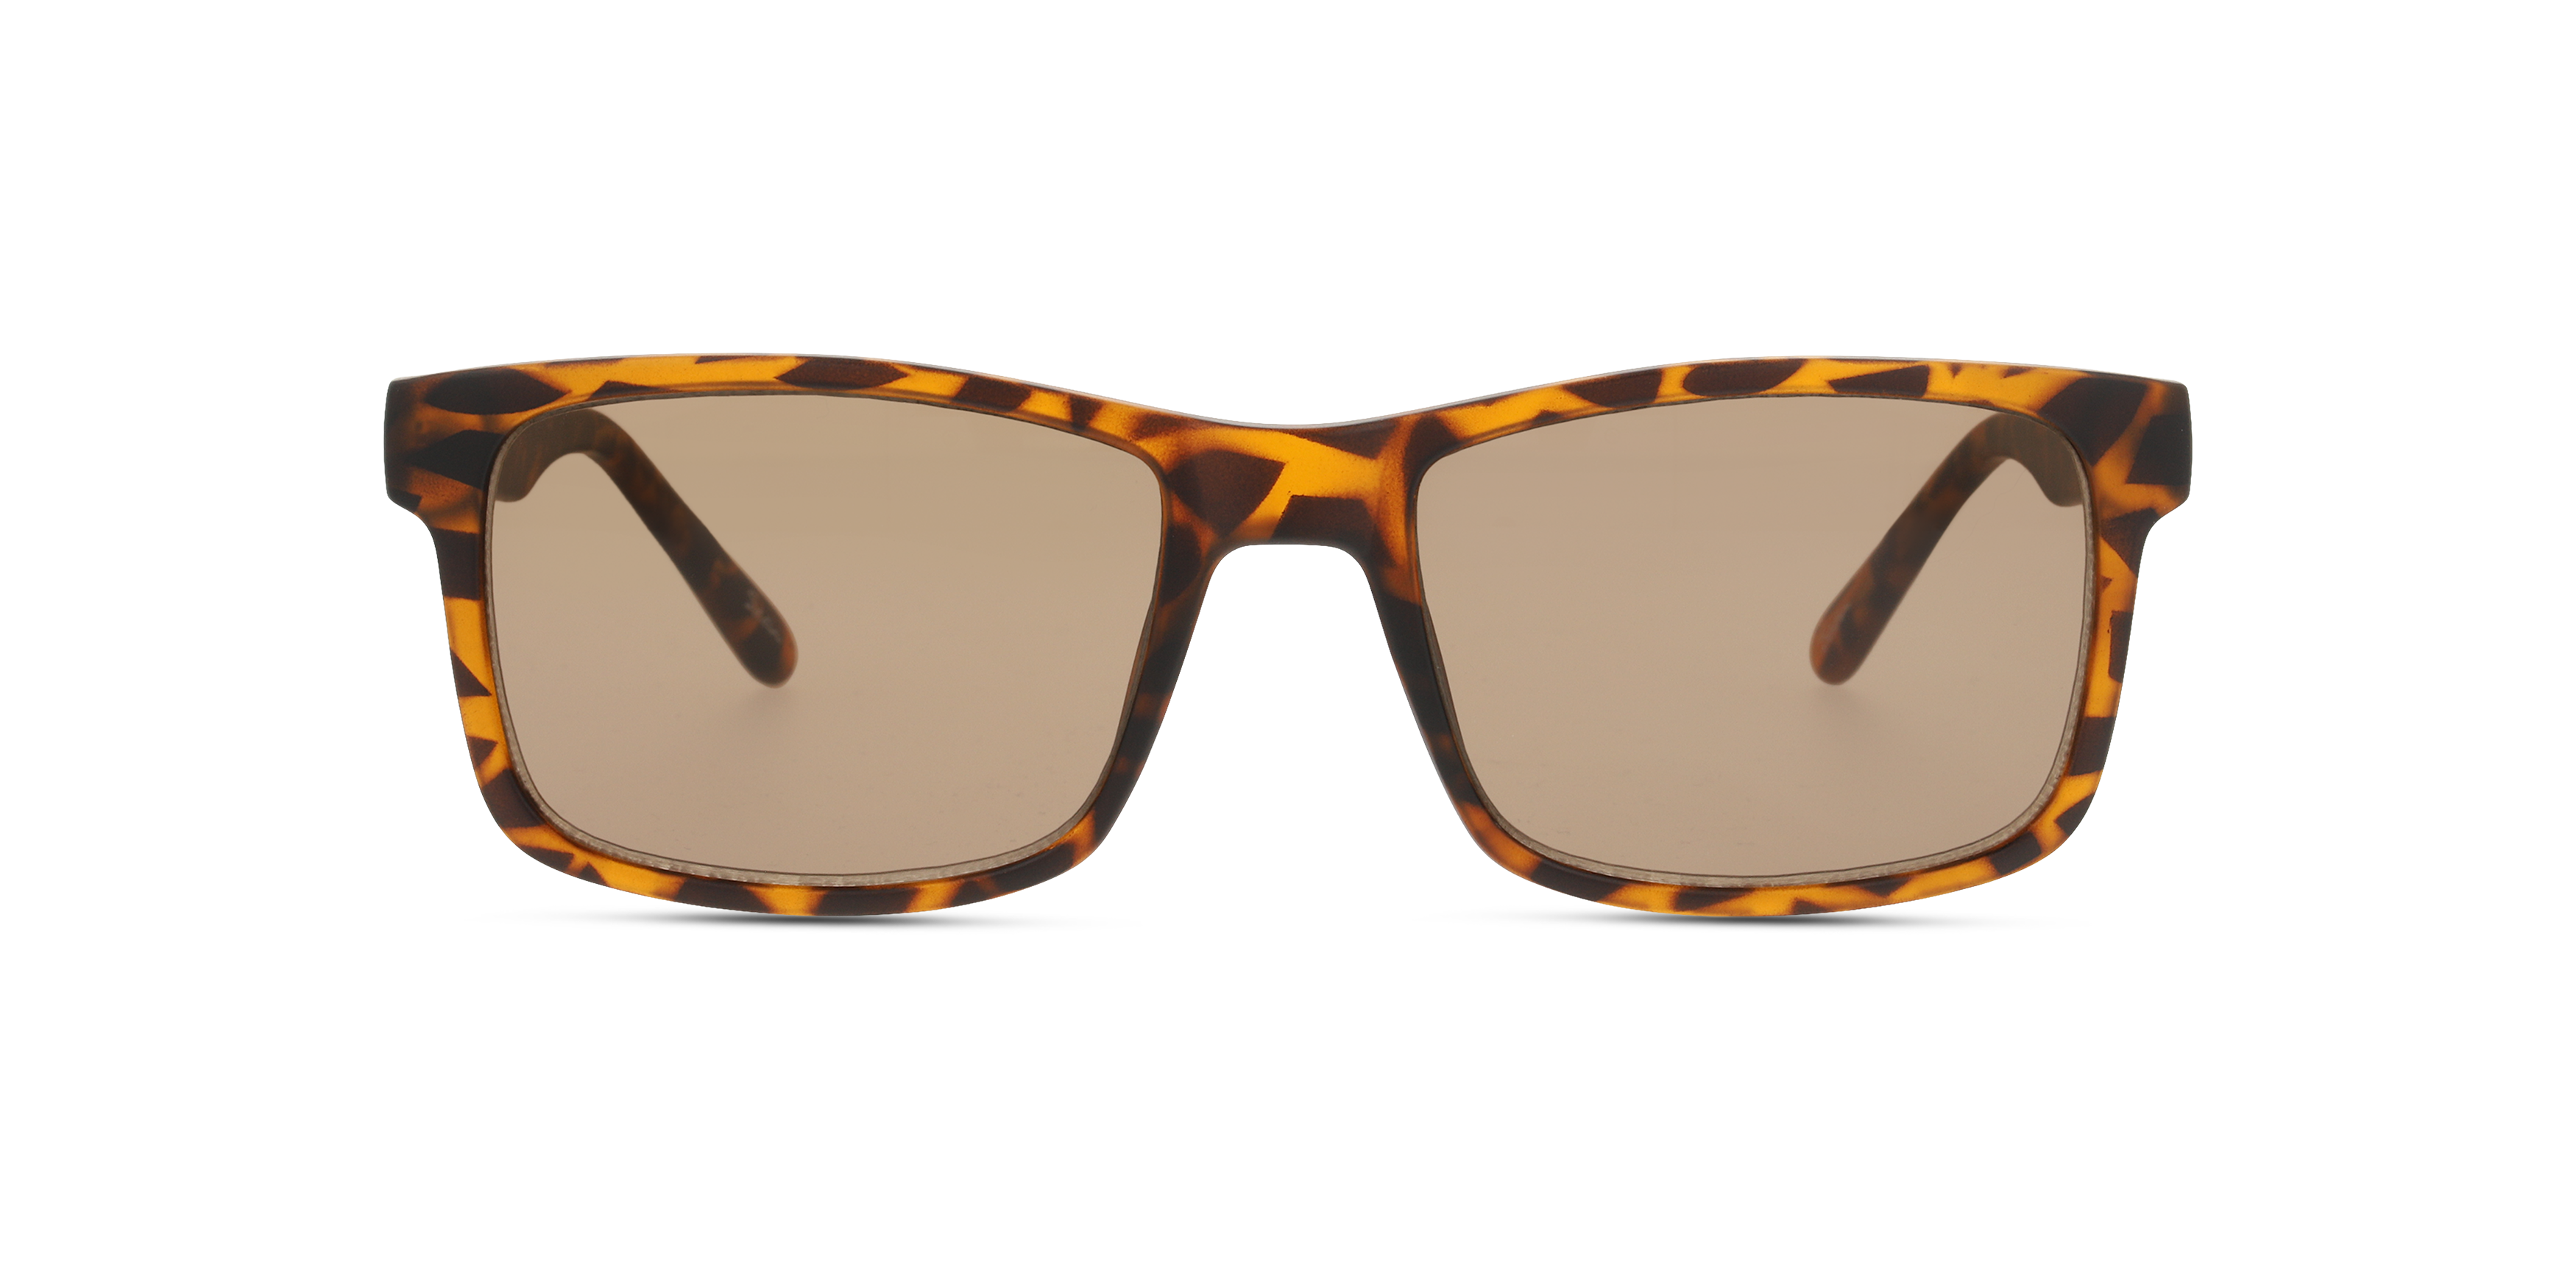 [products.image.front] Seen SNSM0011 Sunglasses